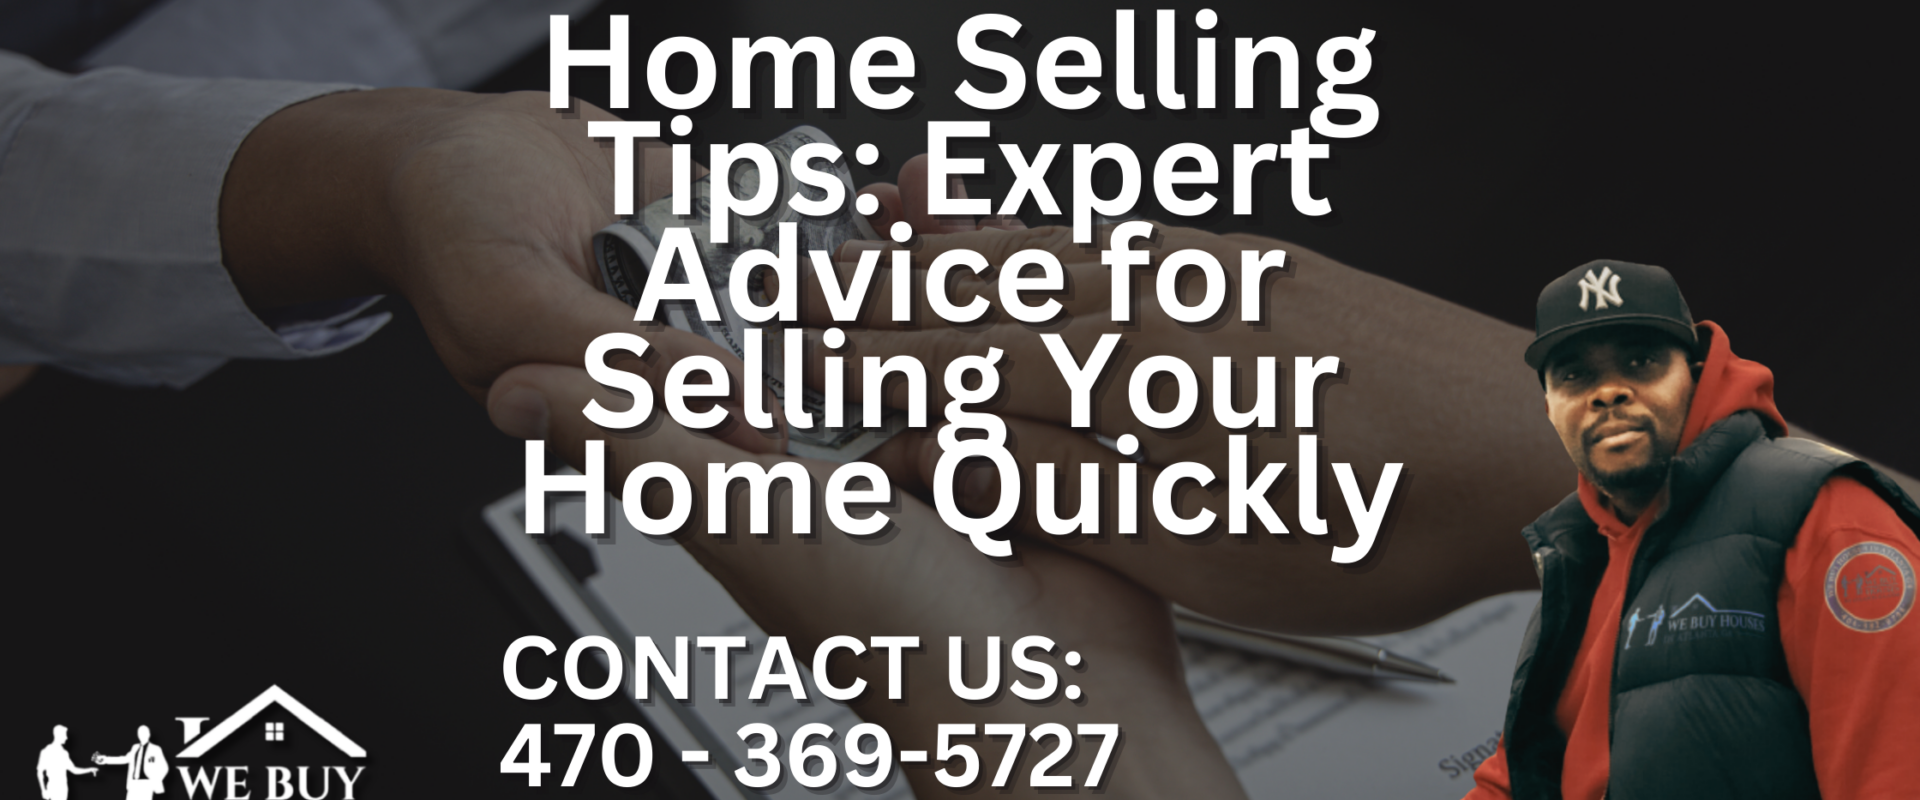 Home Selling Tips: Expert Advice for Selling Your Home Quickly